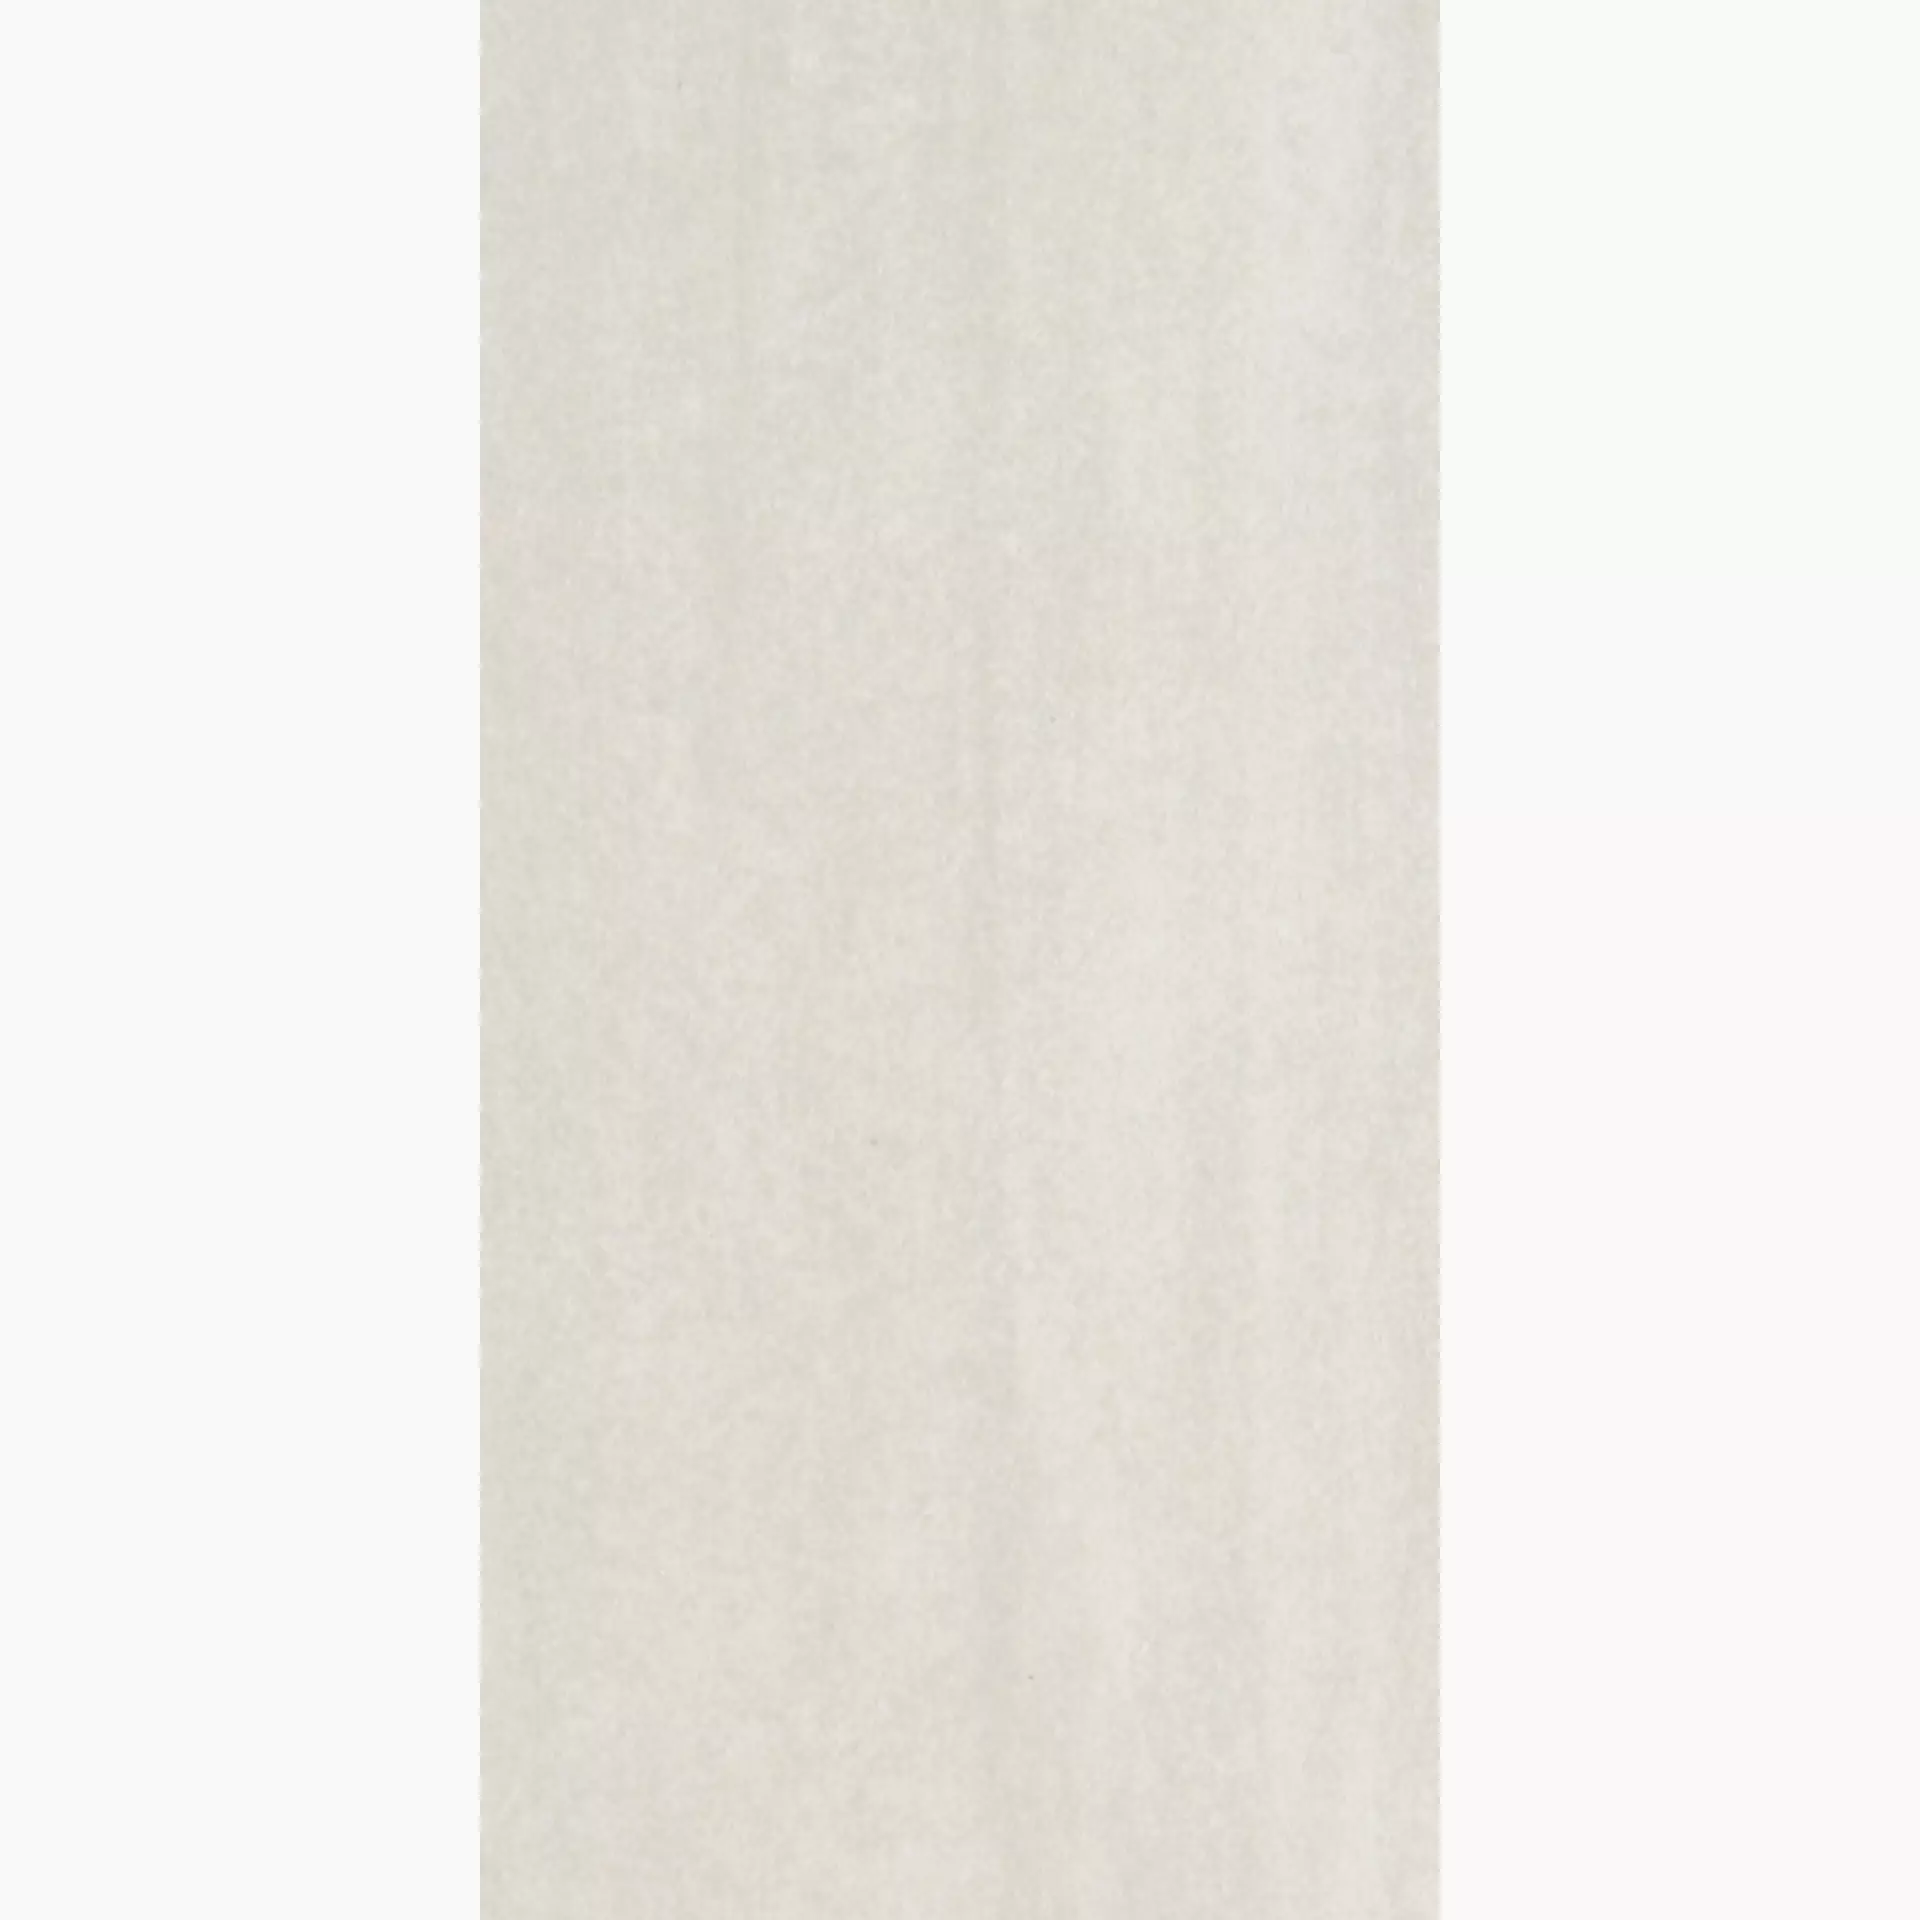 Rondine Contract Ivory Naturale J83702 30,5x60,5cm 9,5mm